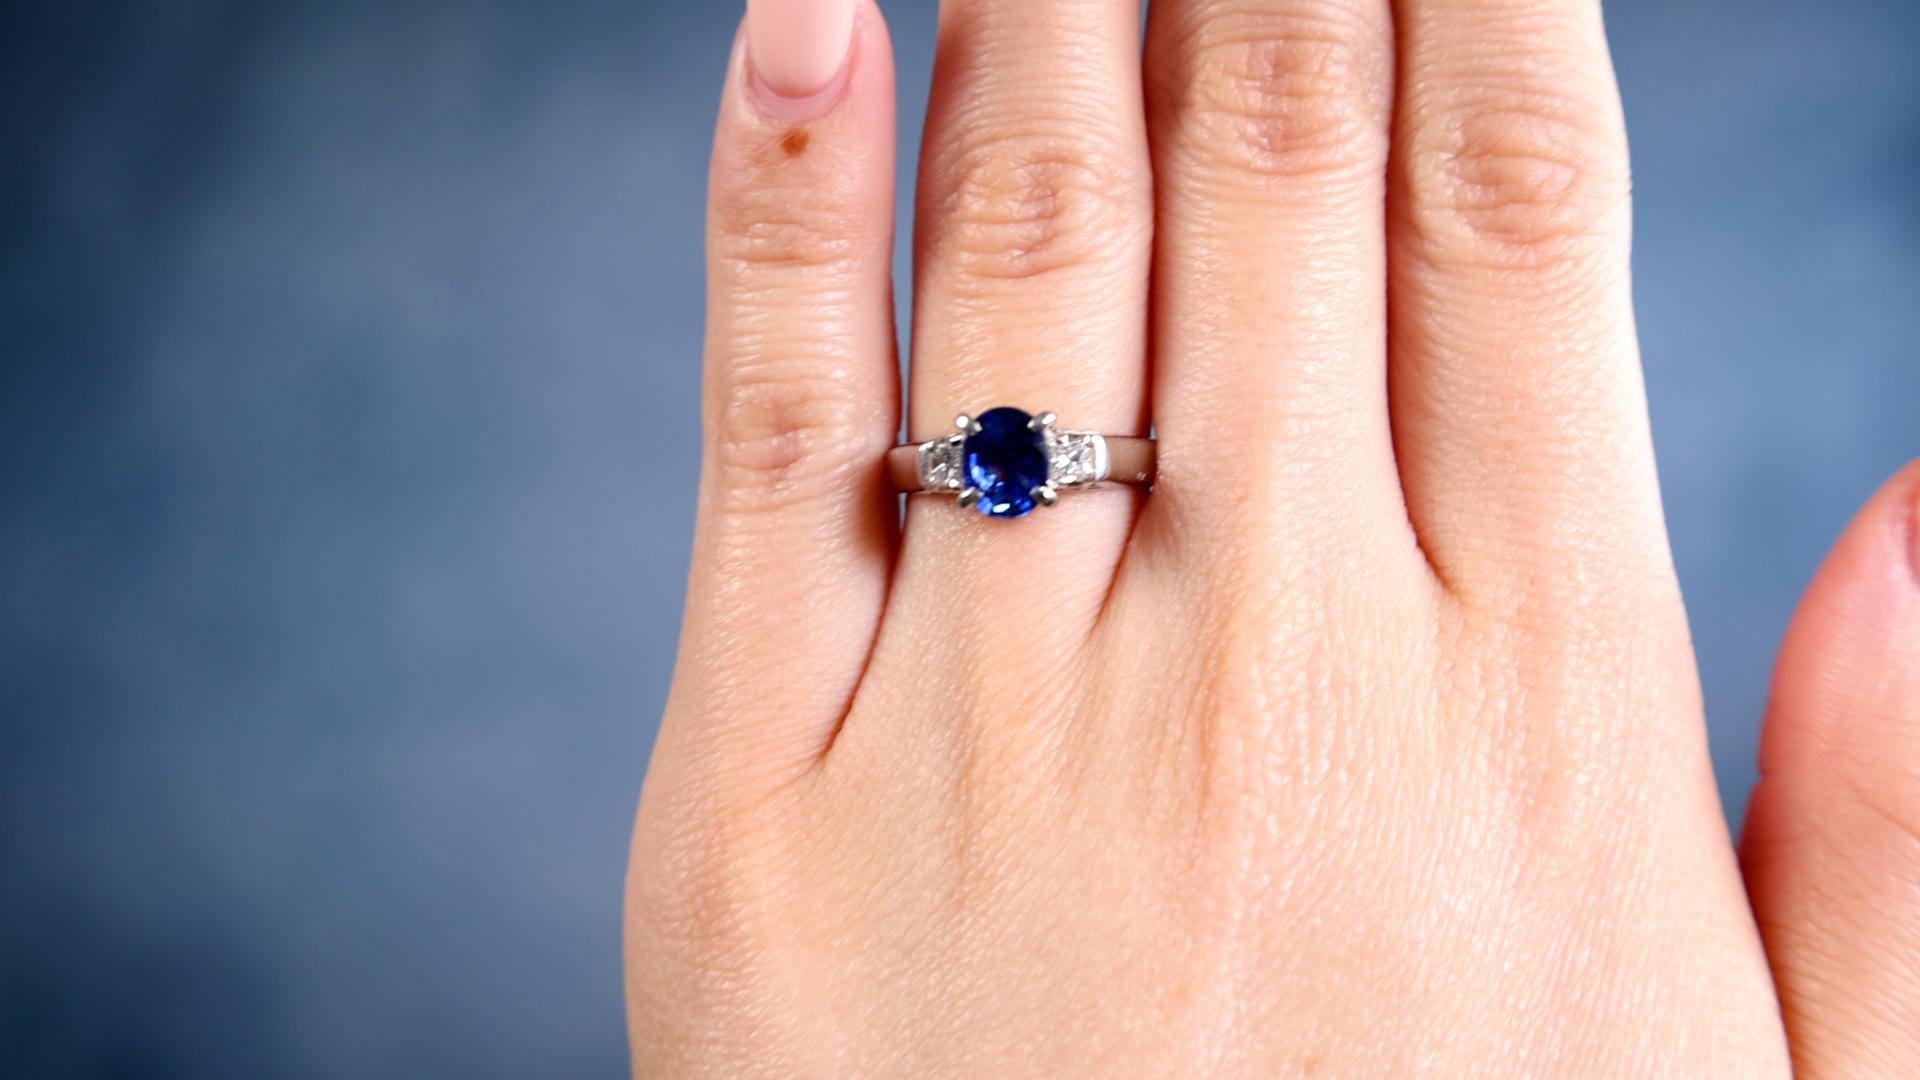 One Vintage Sapphire Diamond Platinum Three Stone Ring. Featuring one oval mixed cut sapphire of 1.08 carats. Accented by two princess cut diamonds with a total weight of 0.20 carat, graded G-H color, VS clarity. Crafted in platinum with purity mark